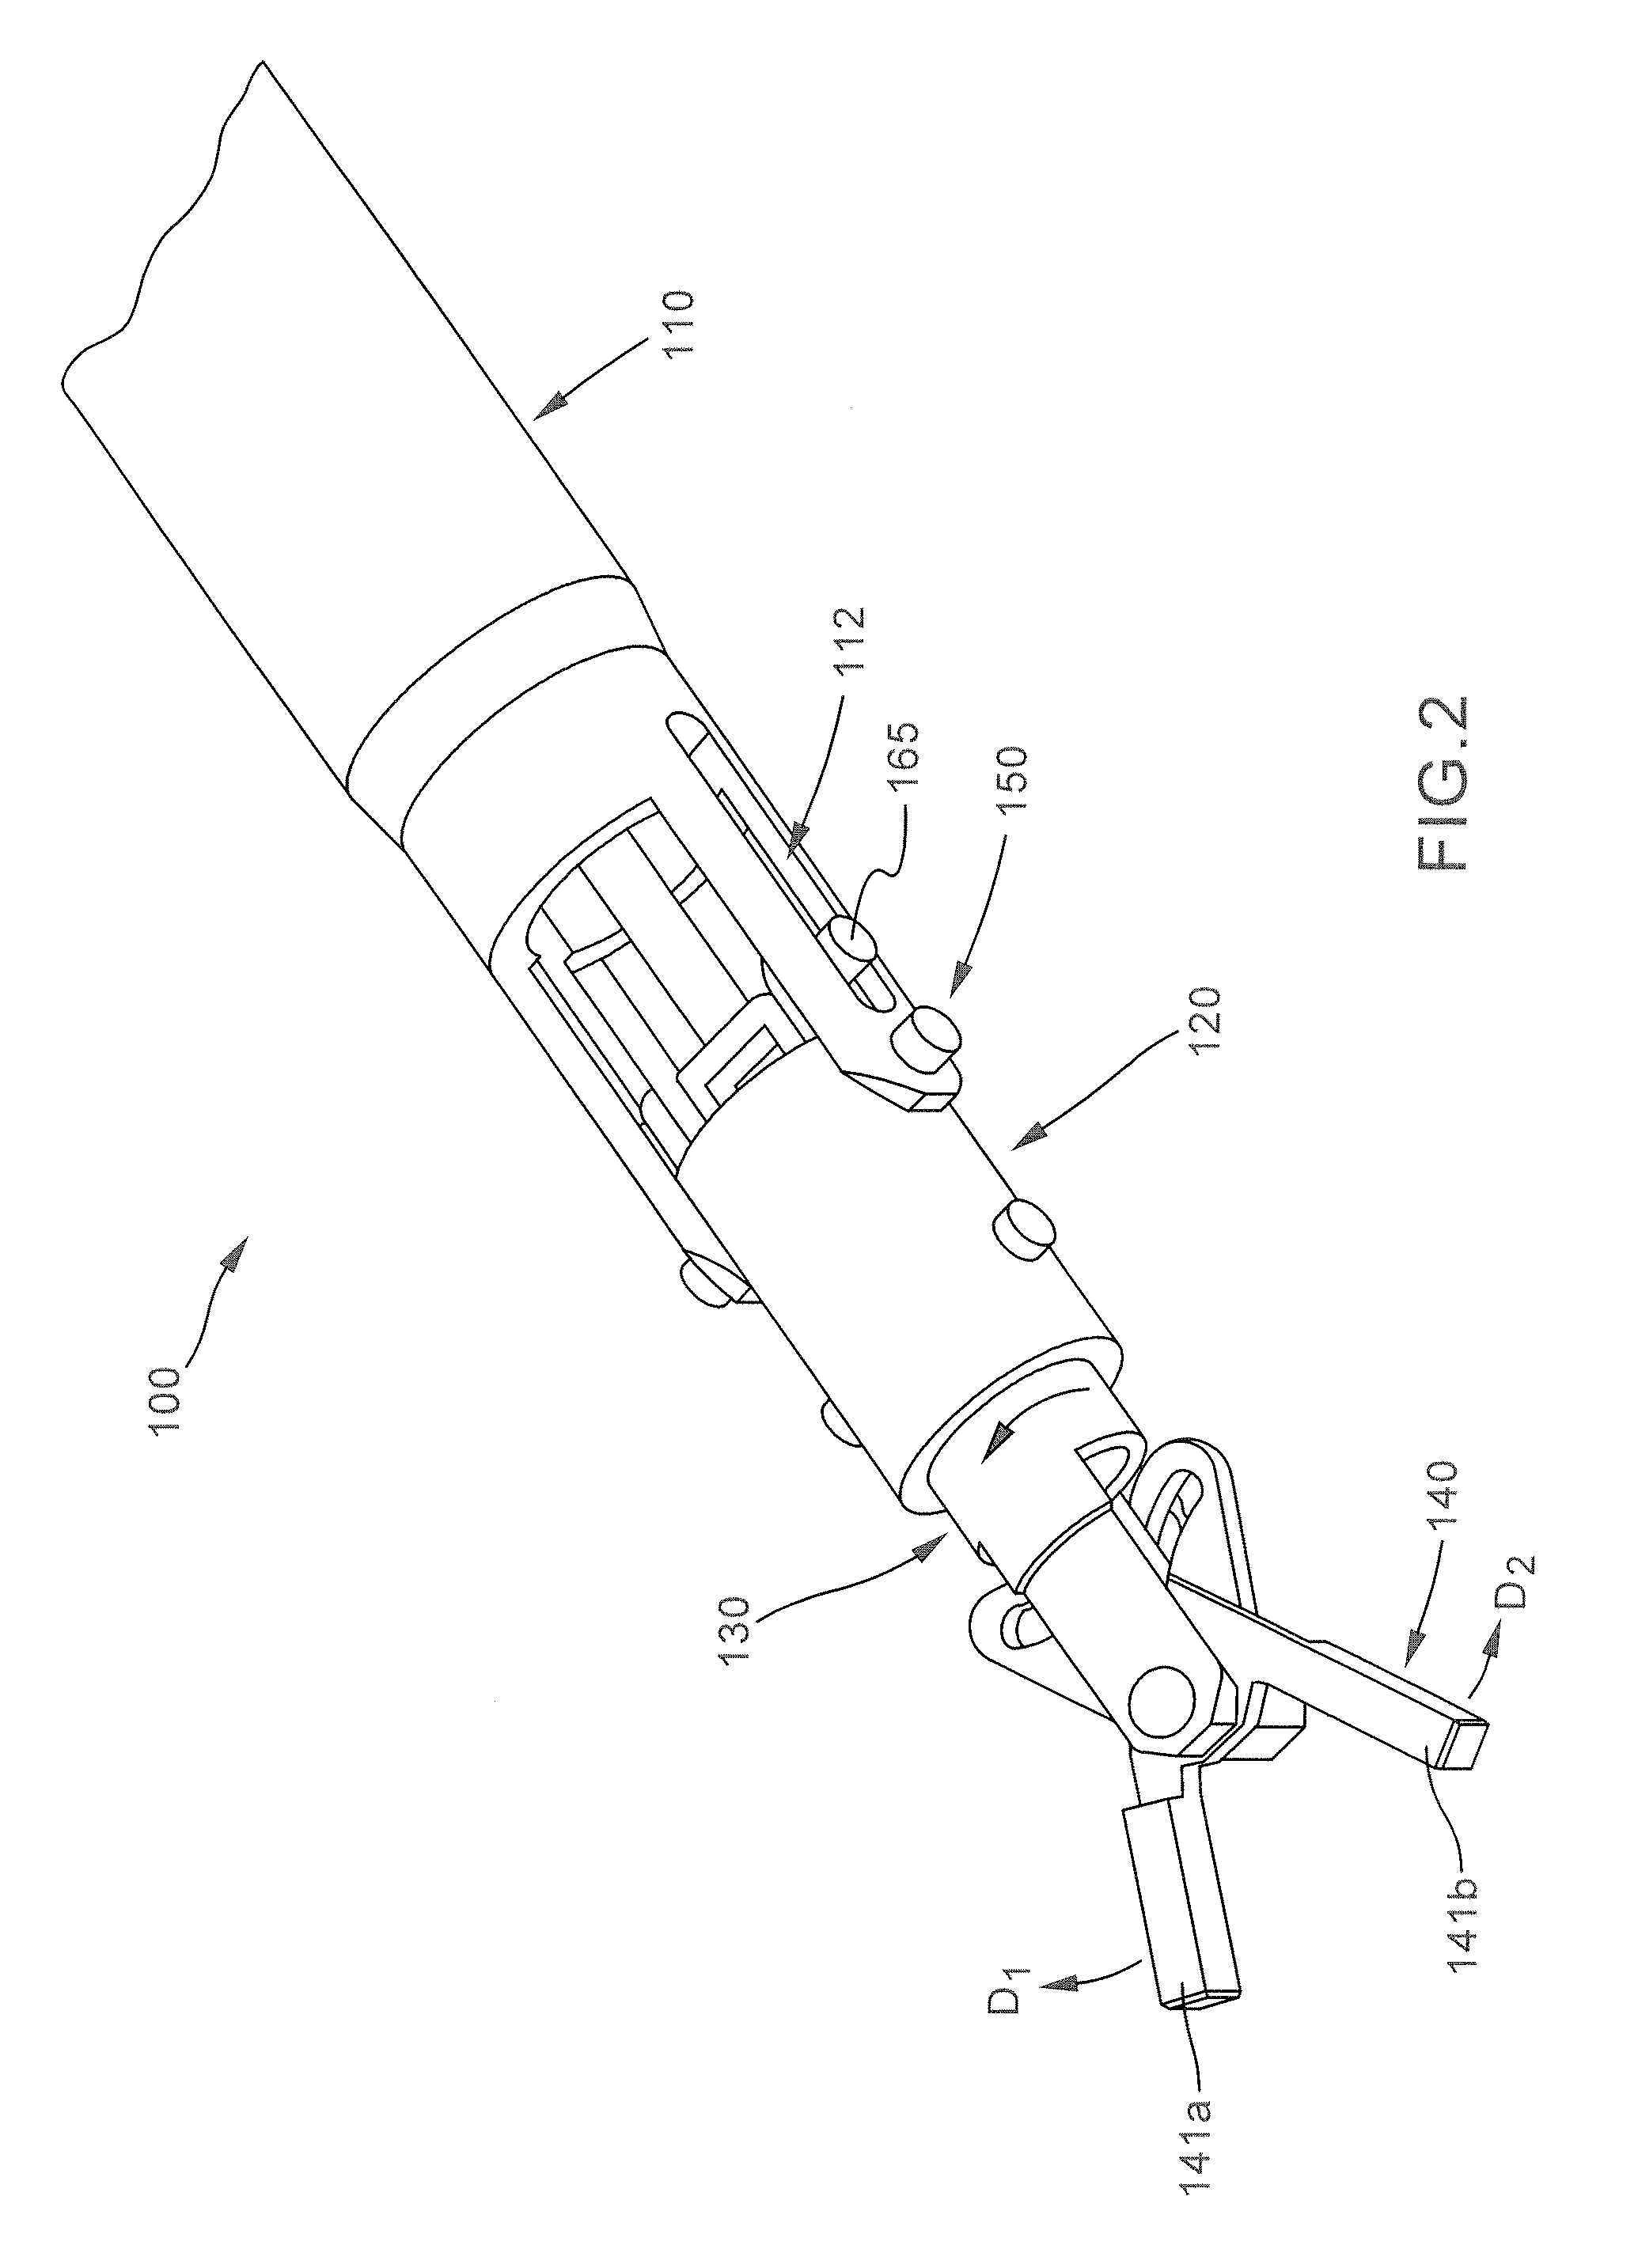 Flexible wrist-type element and methods of manufacture and use thereof